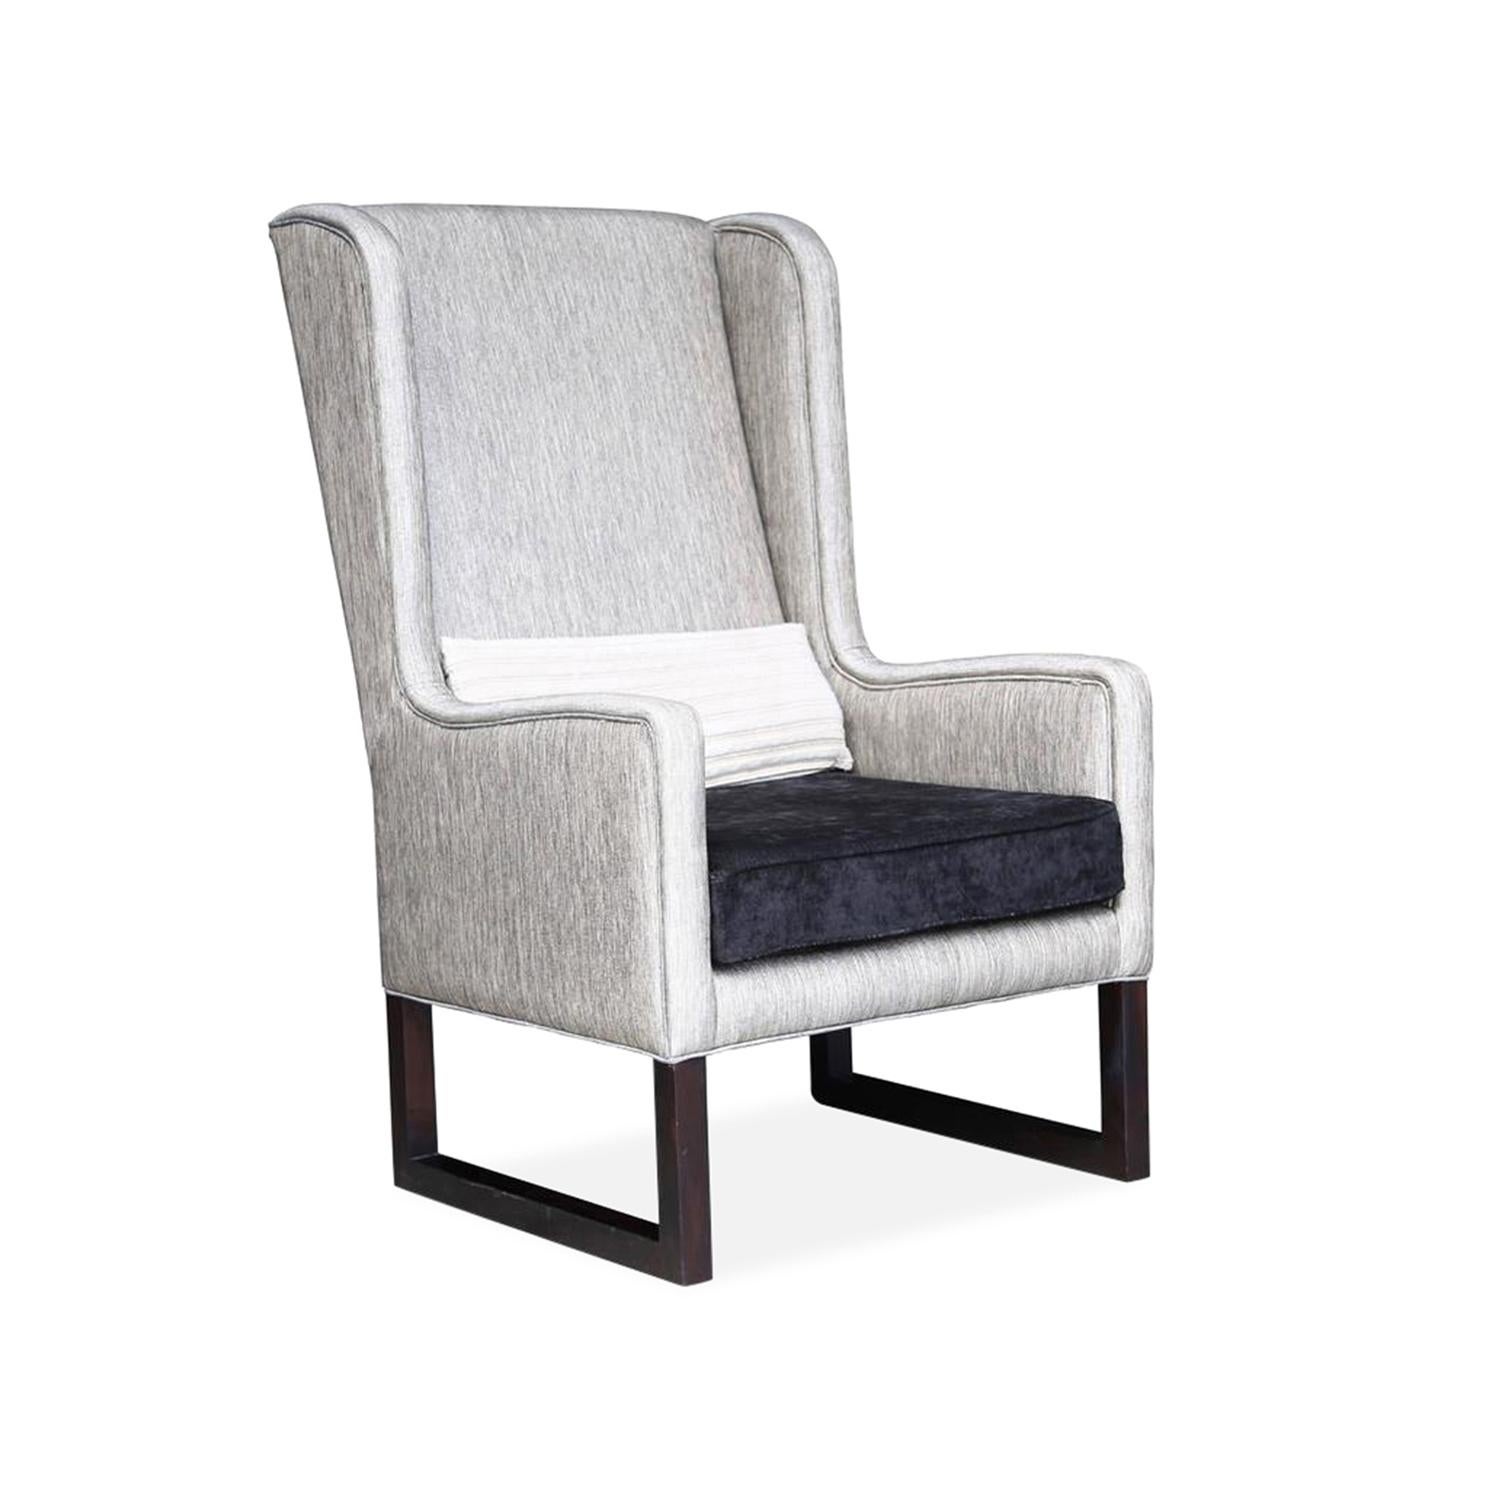 Woodwork Modern High Back Upholstered Wing Chair from Costantini, Matteo For Sale